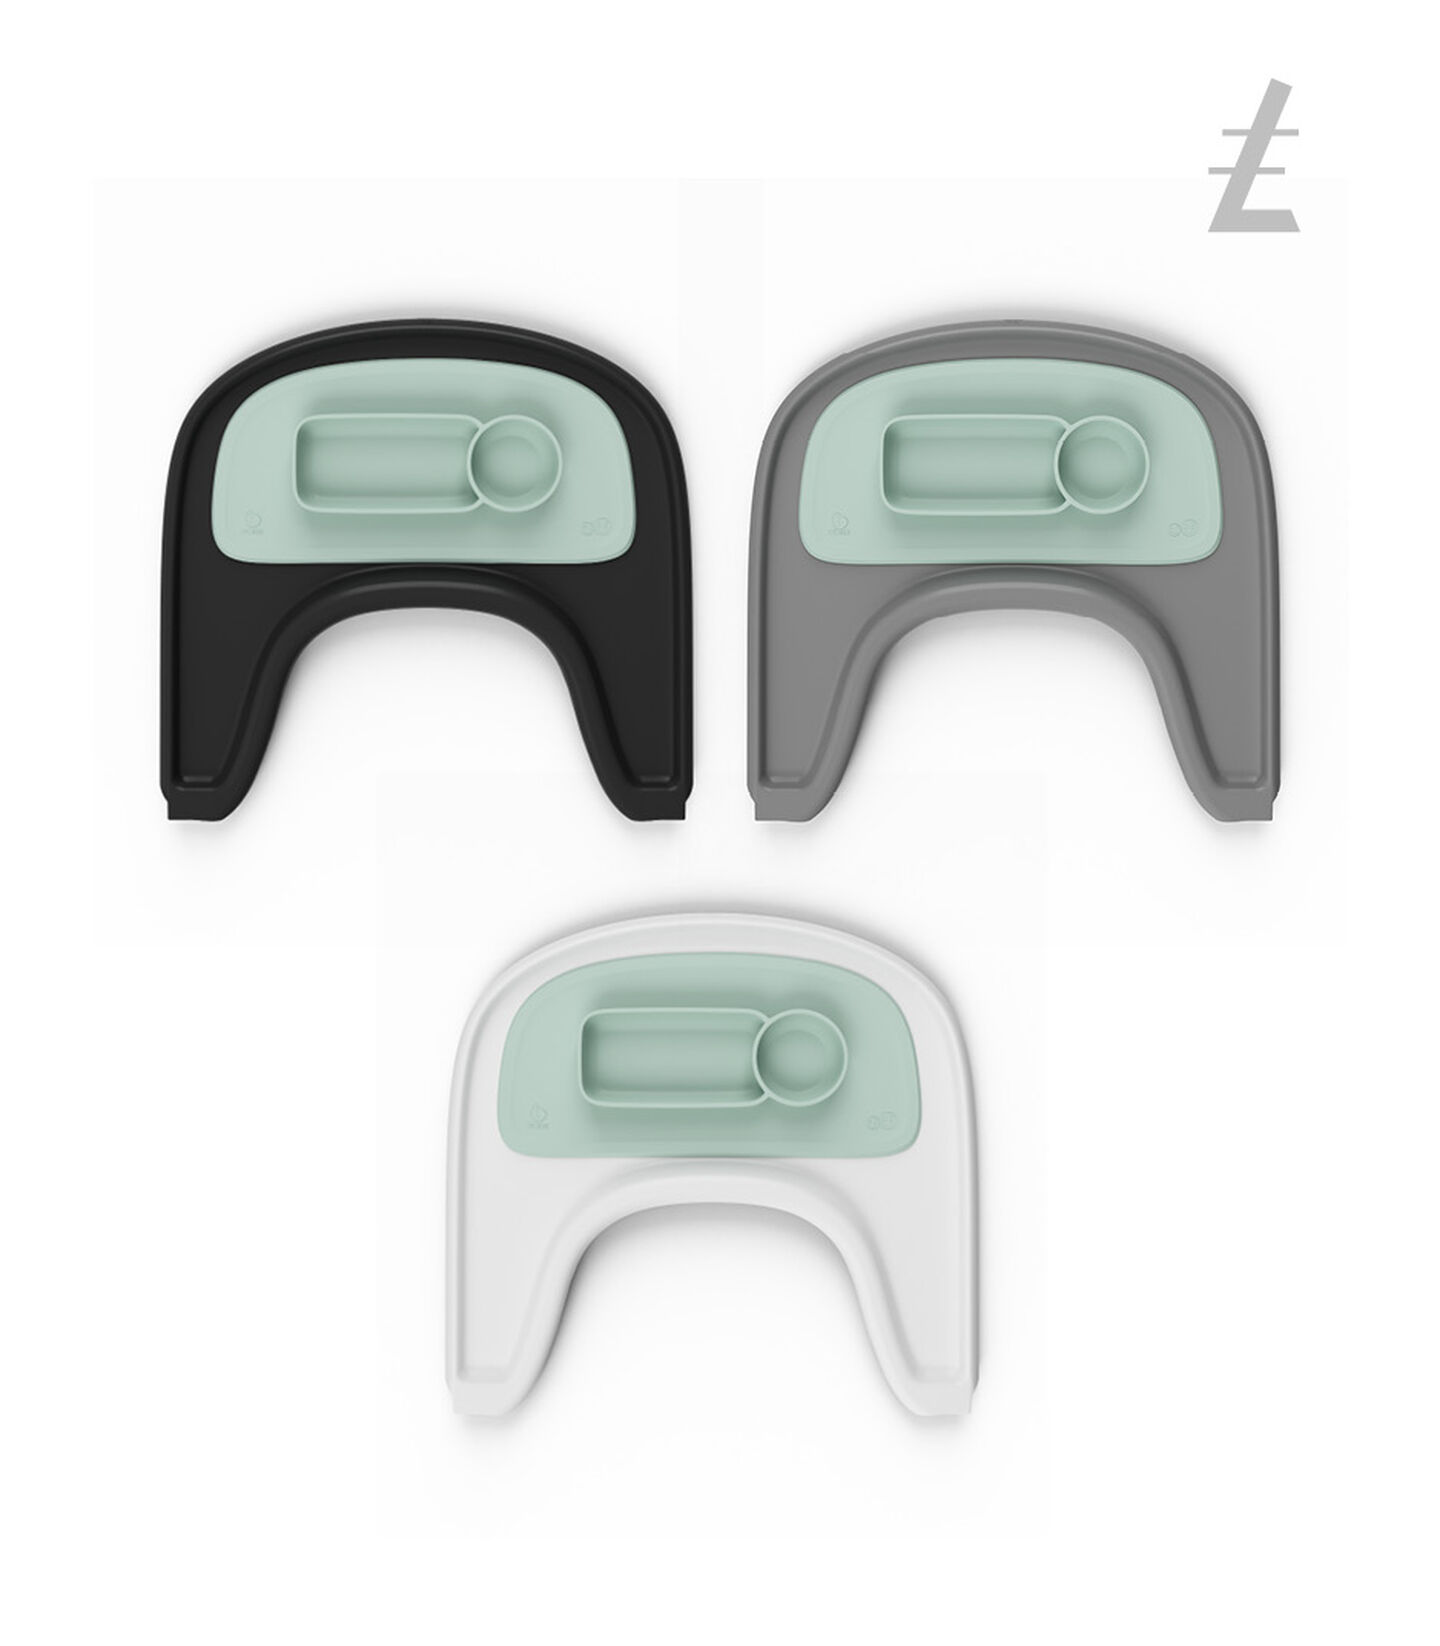 ezpz™ by Stokke™ placemat for Stokke® Tray Soft Mint, Мятно-зелёный, mainview view 4